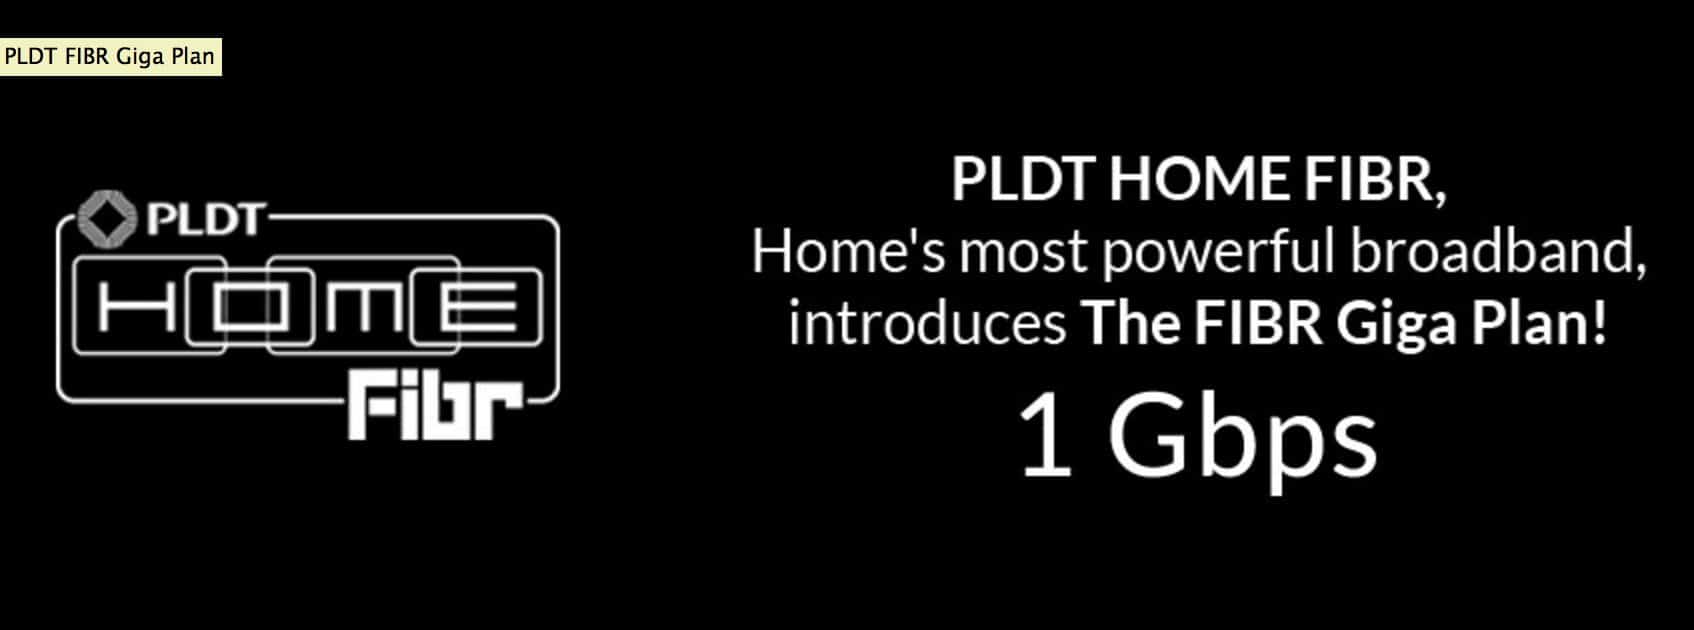 A black and white image showcasing the advantages of PLDT Home Fibr 1Gbps, a fast internet broadband plan for homes.